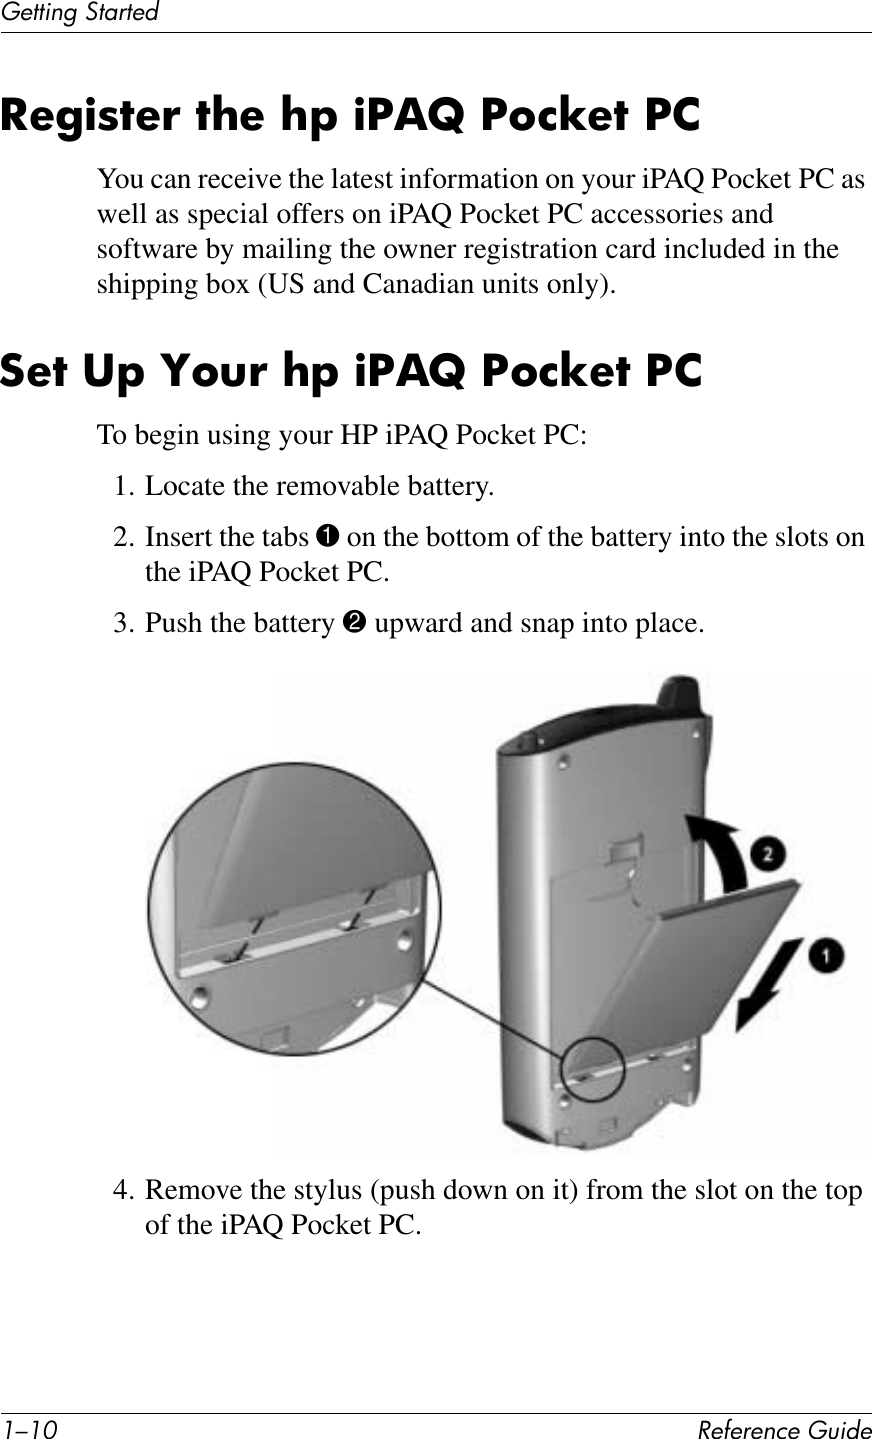 ./.I !&quot;#&quot;$&quot;%&amp;&quot;&apos;()*+&quot;(&quot;11*%2&apos;314$1&quot;+-&quot;&apos;)87&quot;!&amp;7?&quot;&amp;?F&amp;)S,b&amp;S6%T&quot;7&amp;S2You can receive the latest information on your iPAQ Pocket PC as well as special offers on iPAQ Pocket PC accessories and software by mailing the owner registration card included in the shipping box (US and Canadian units only).:&quot;7&amp;3F&amp;c6(!&amp;?F&amp;)S,b&amp;S6%T&quot;7&amp;S2To begin using your HP iPAQ Pocket PC:1. Locate the removable battery.2. Insert the tabs 1 on the bottom of the battery into the slots on the iPAQ Pocket PC.3. Push the battery 2 upward and snap into place.4. Remove the stylus (push down on it) from the slot on the top of the iPAQ Pocket PC.